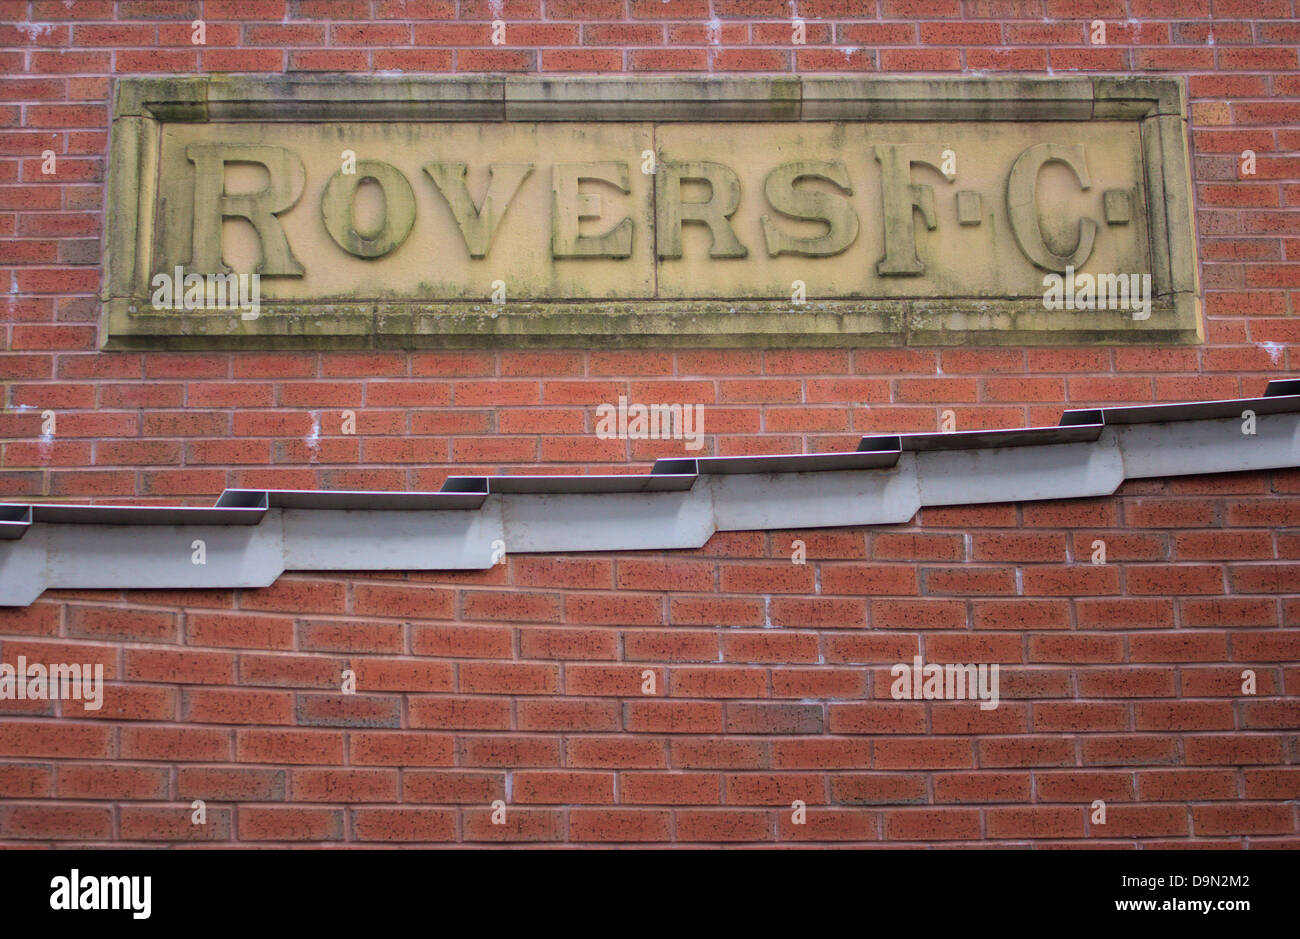 Rovers F.C. Sign Stock Photo